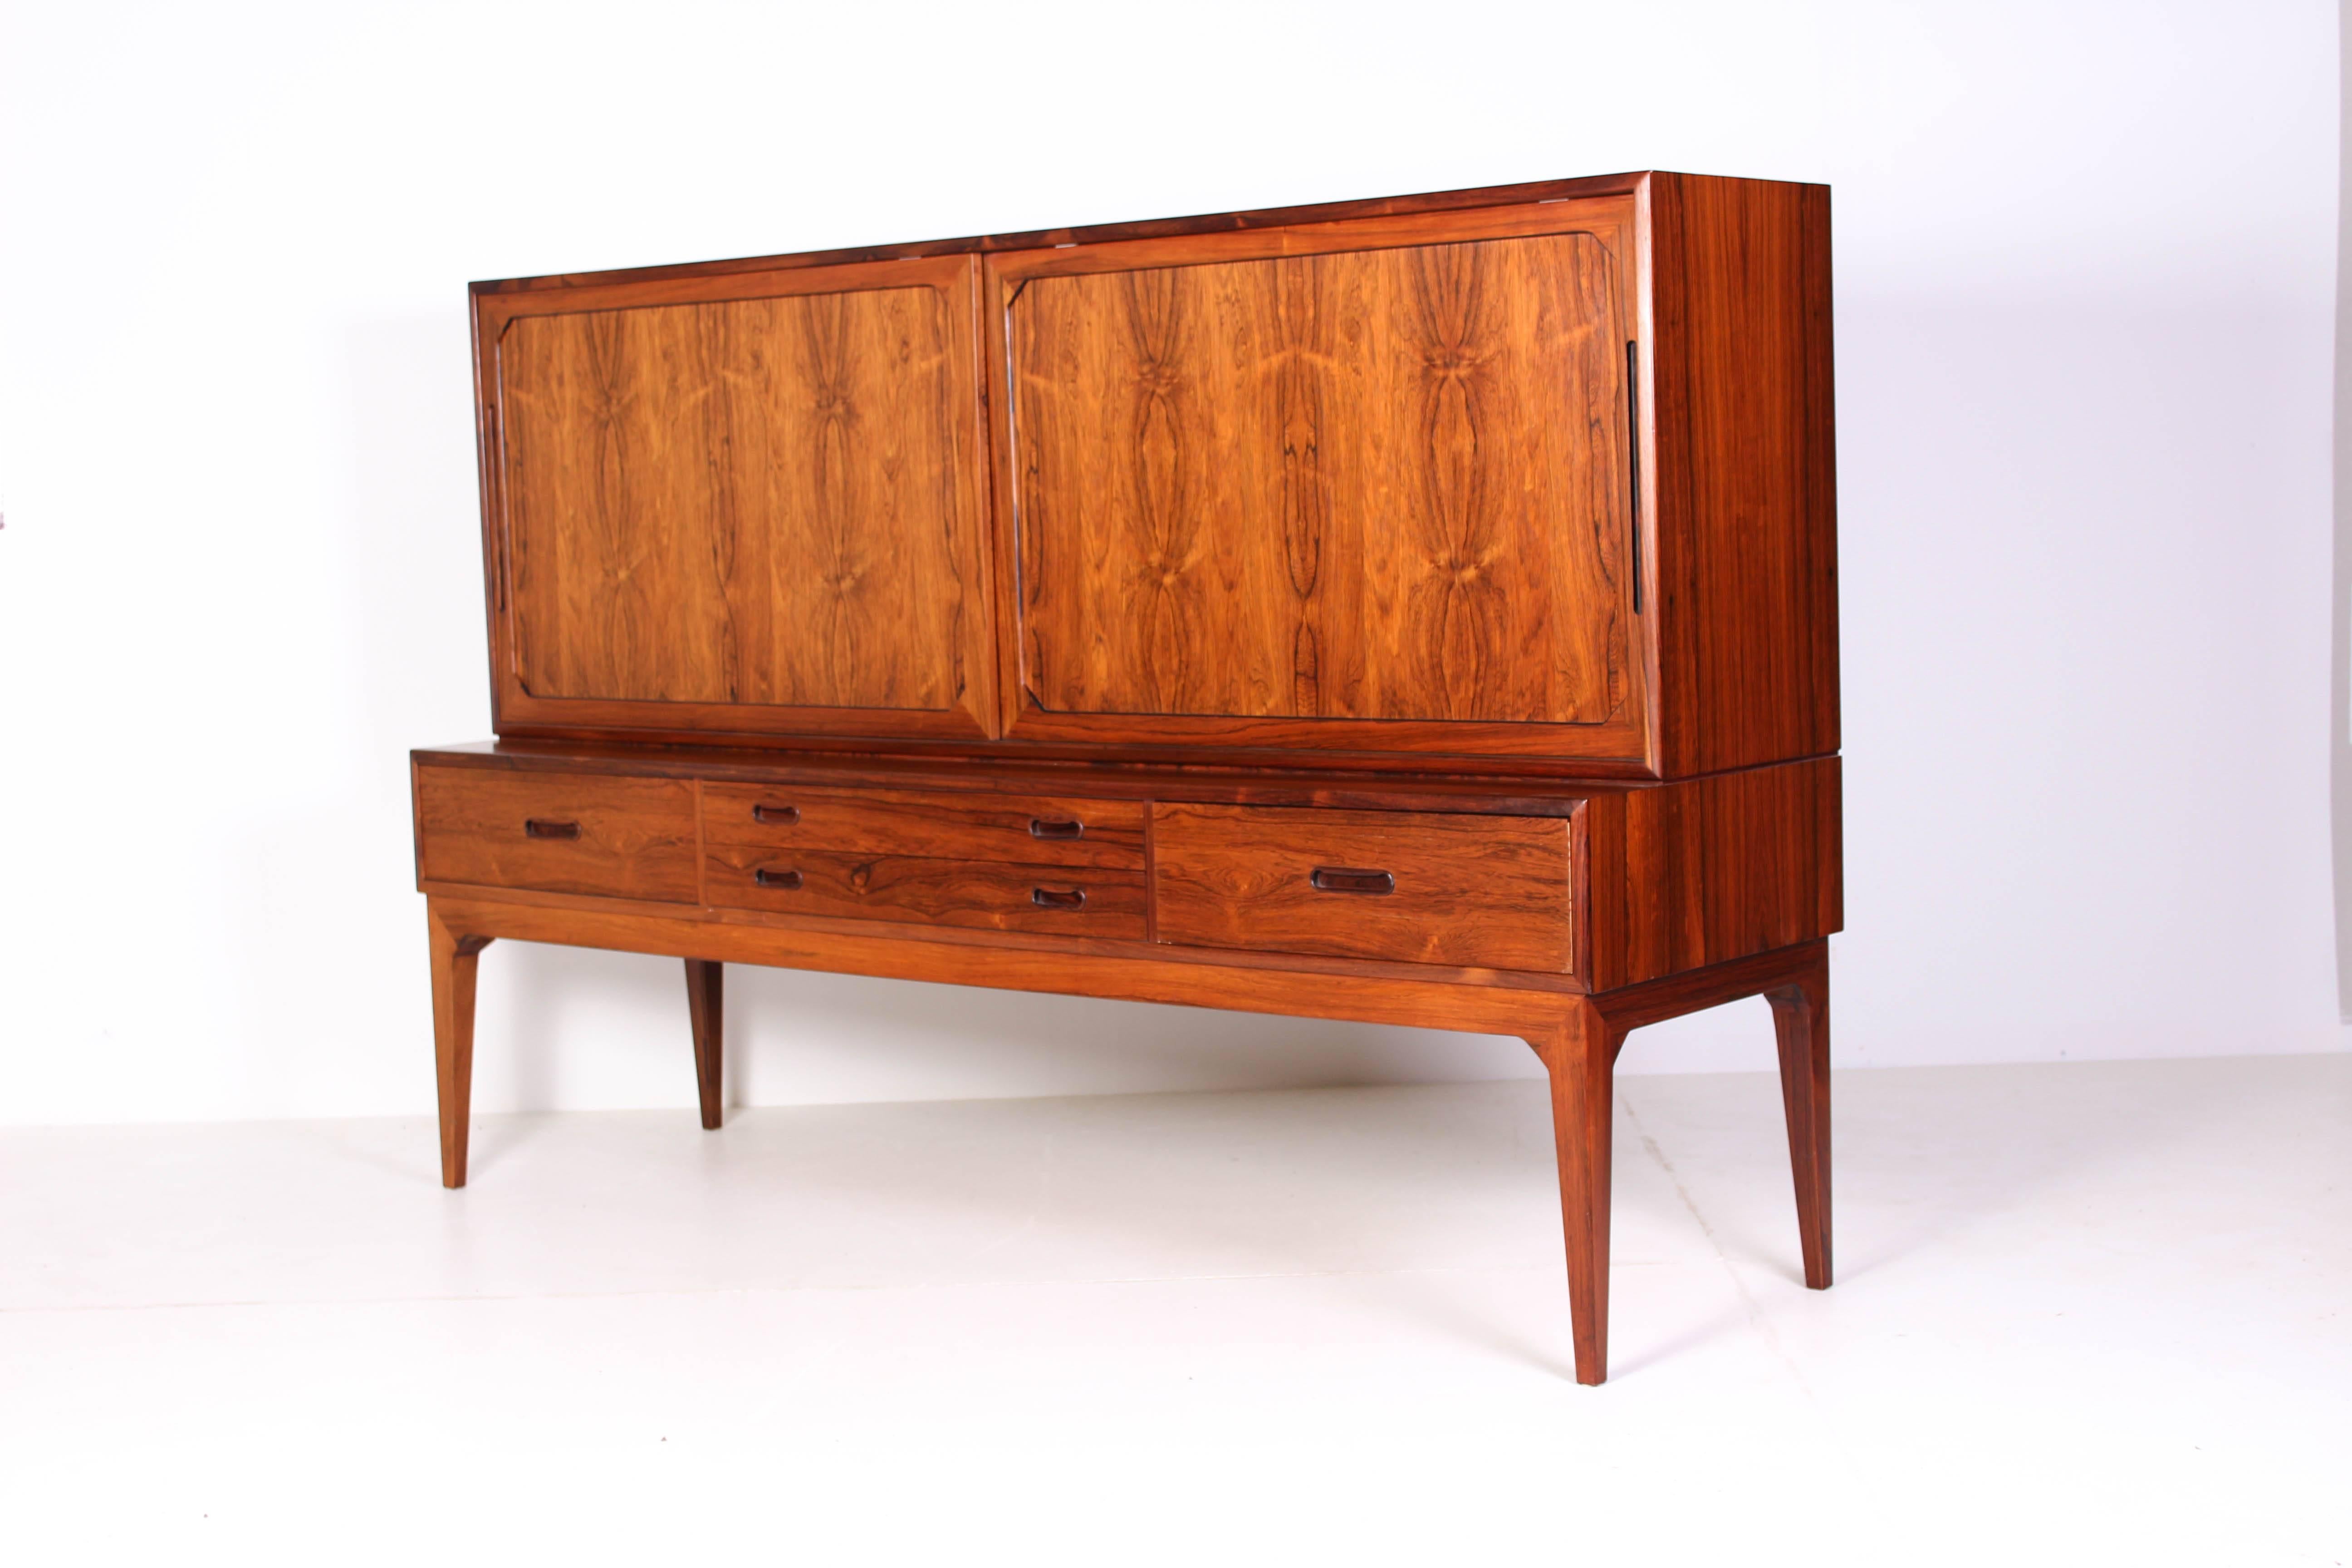 Midcentury Danish Rosewood Sideboard by Severin Hansen In Excellent Condition For Sale In Malmo, SE